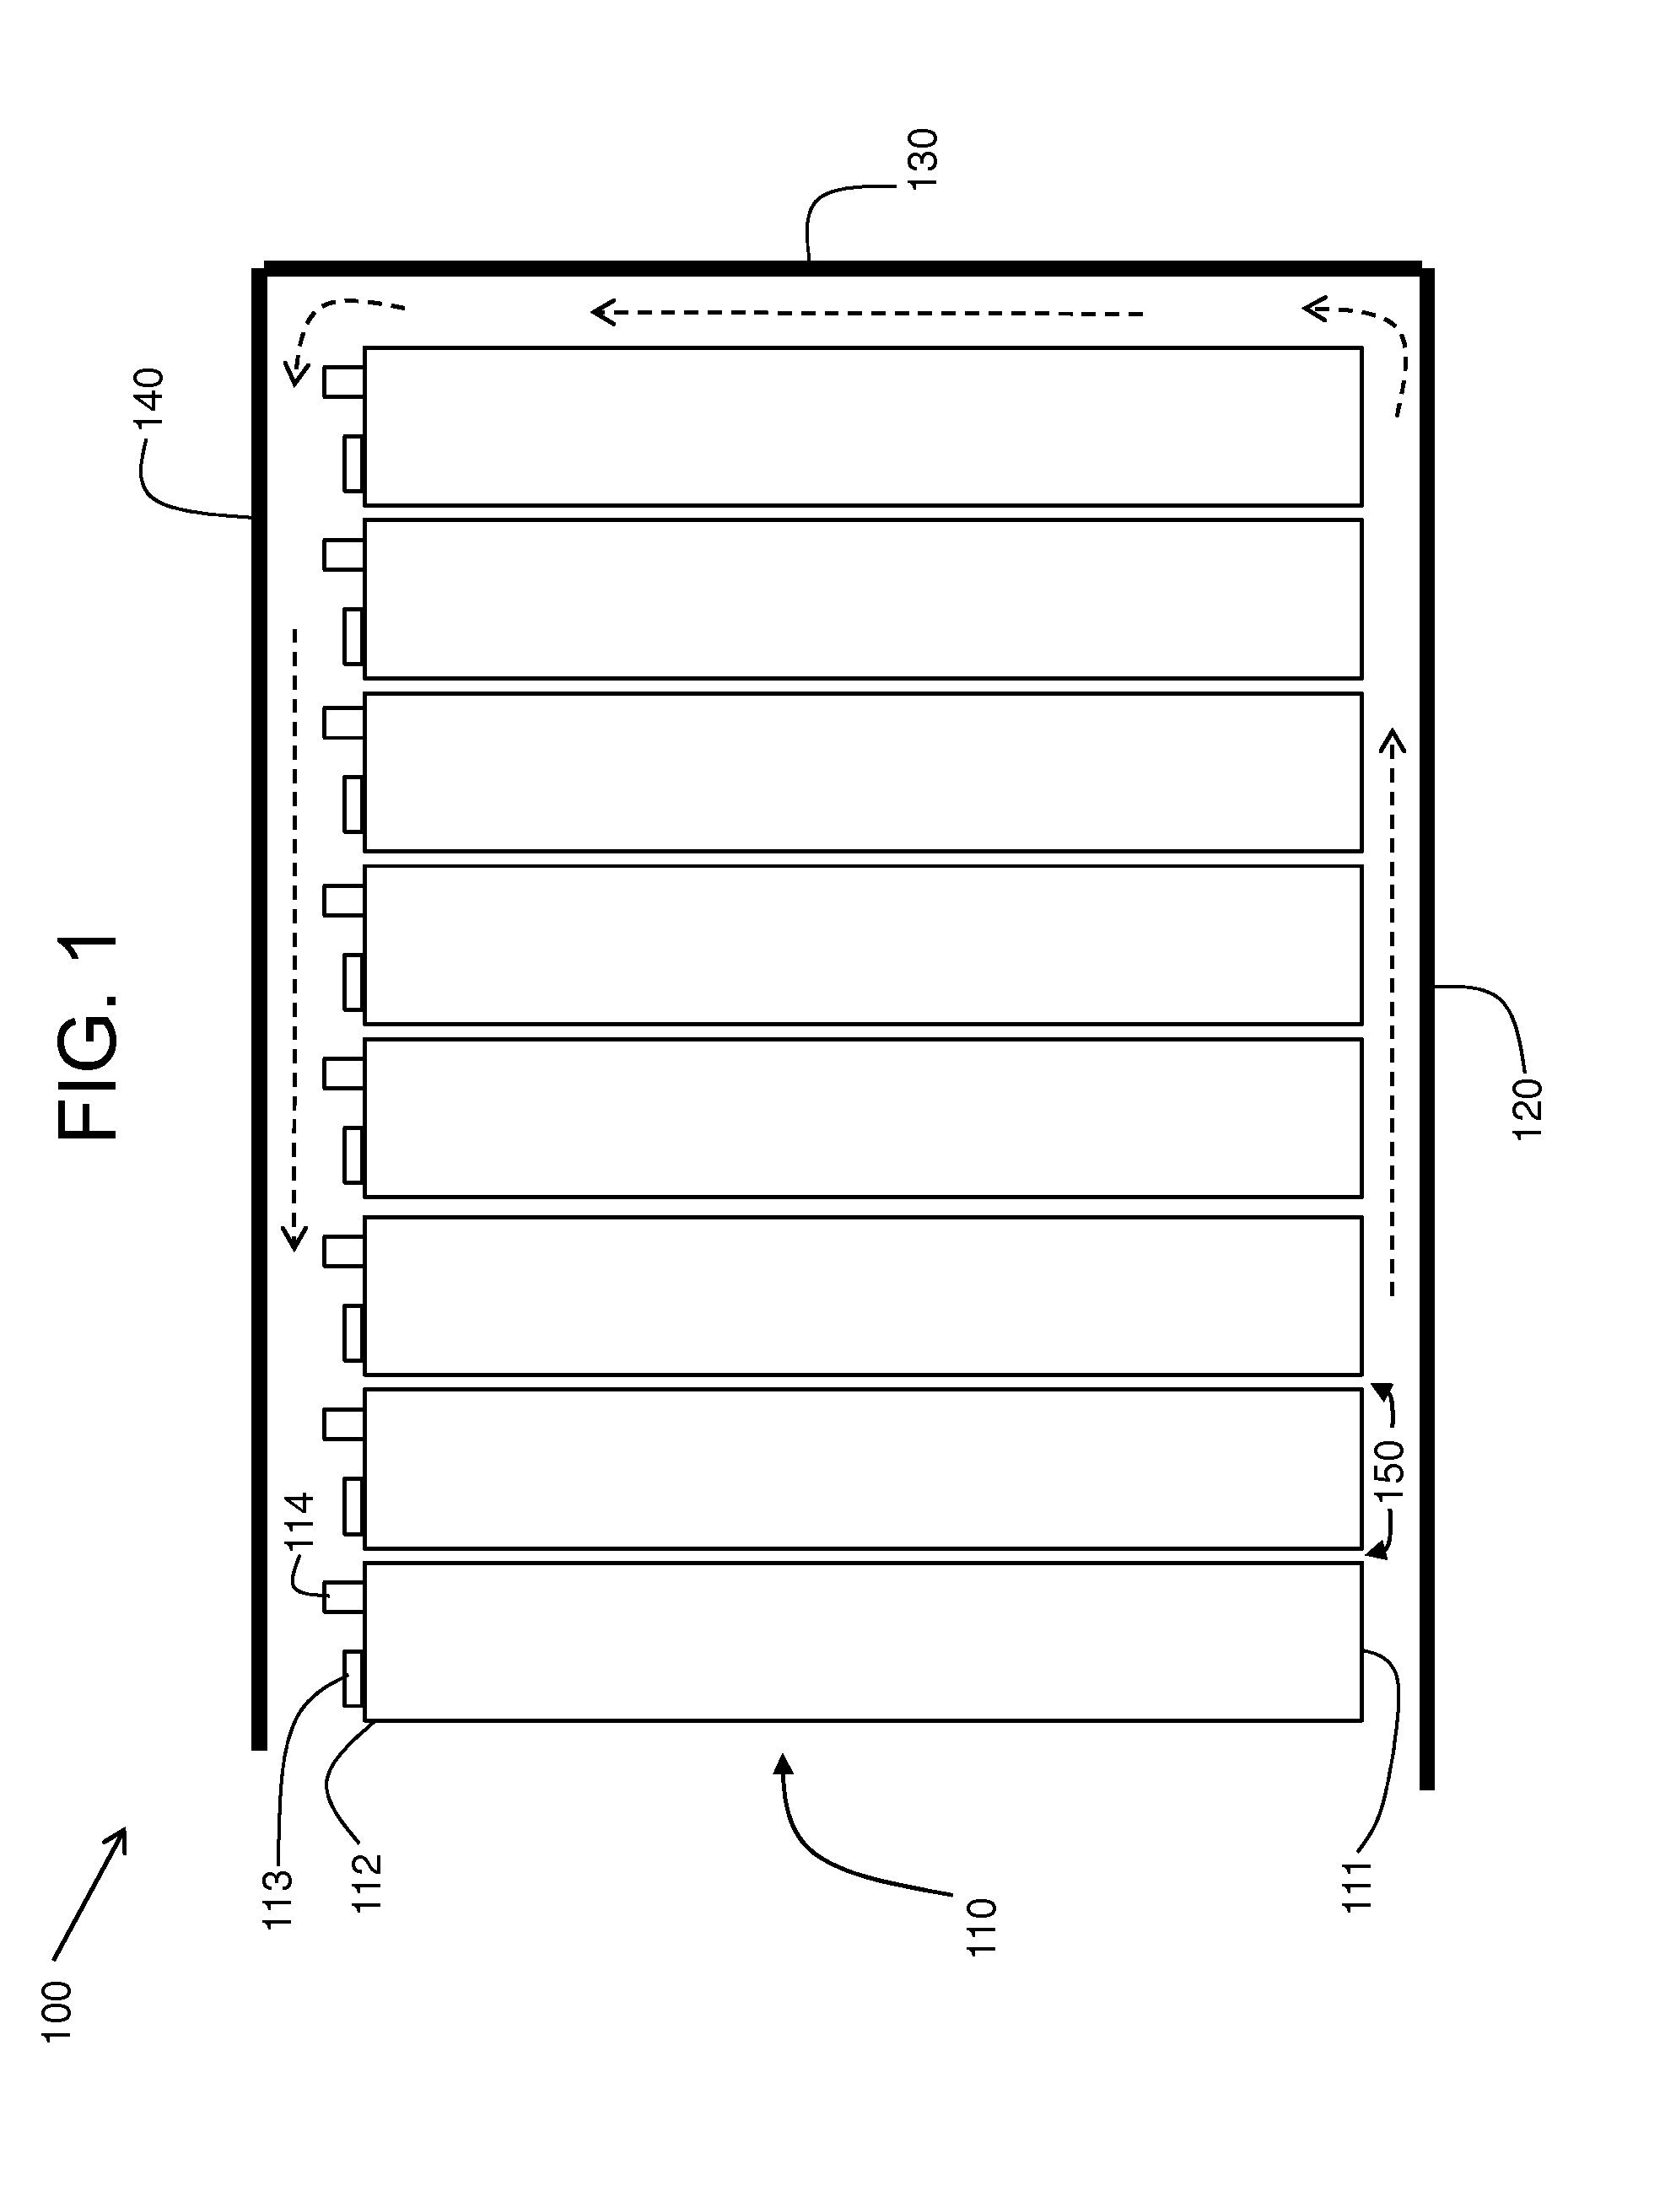 Thermal management system for a multi-cell array